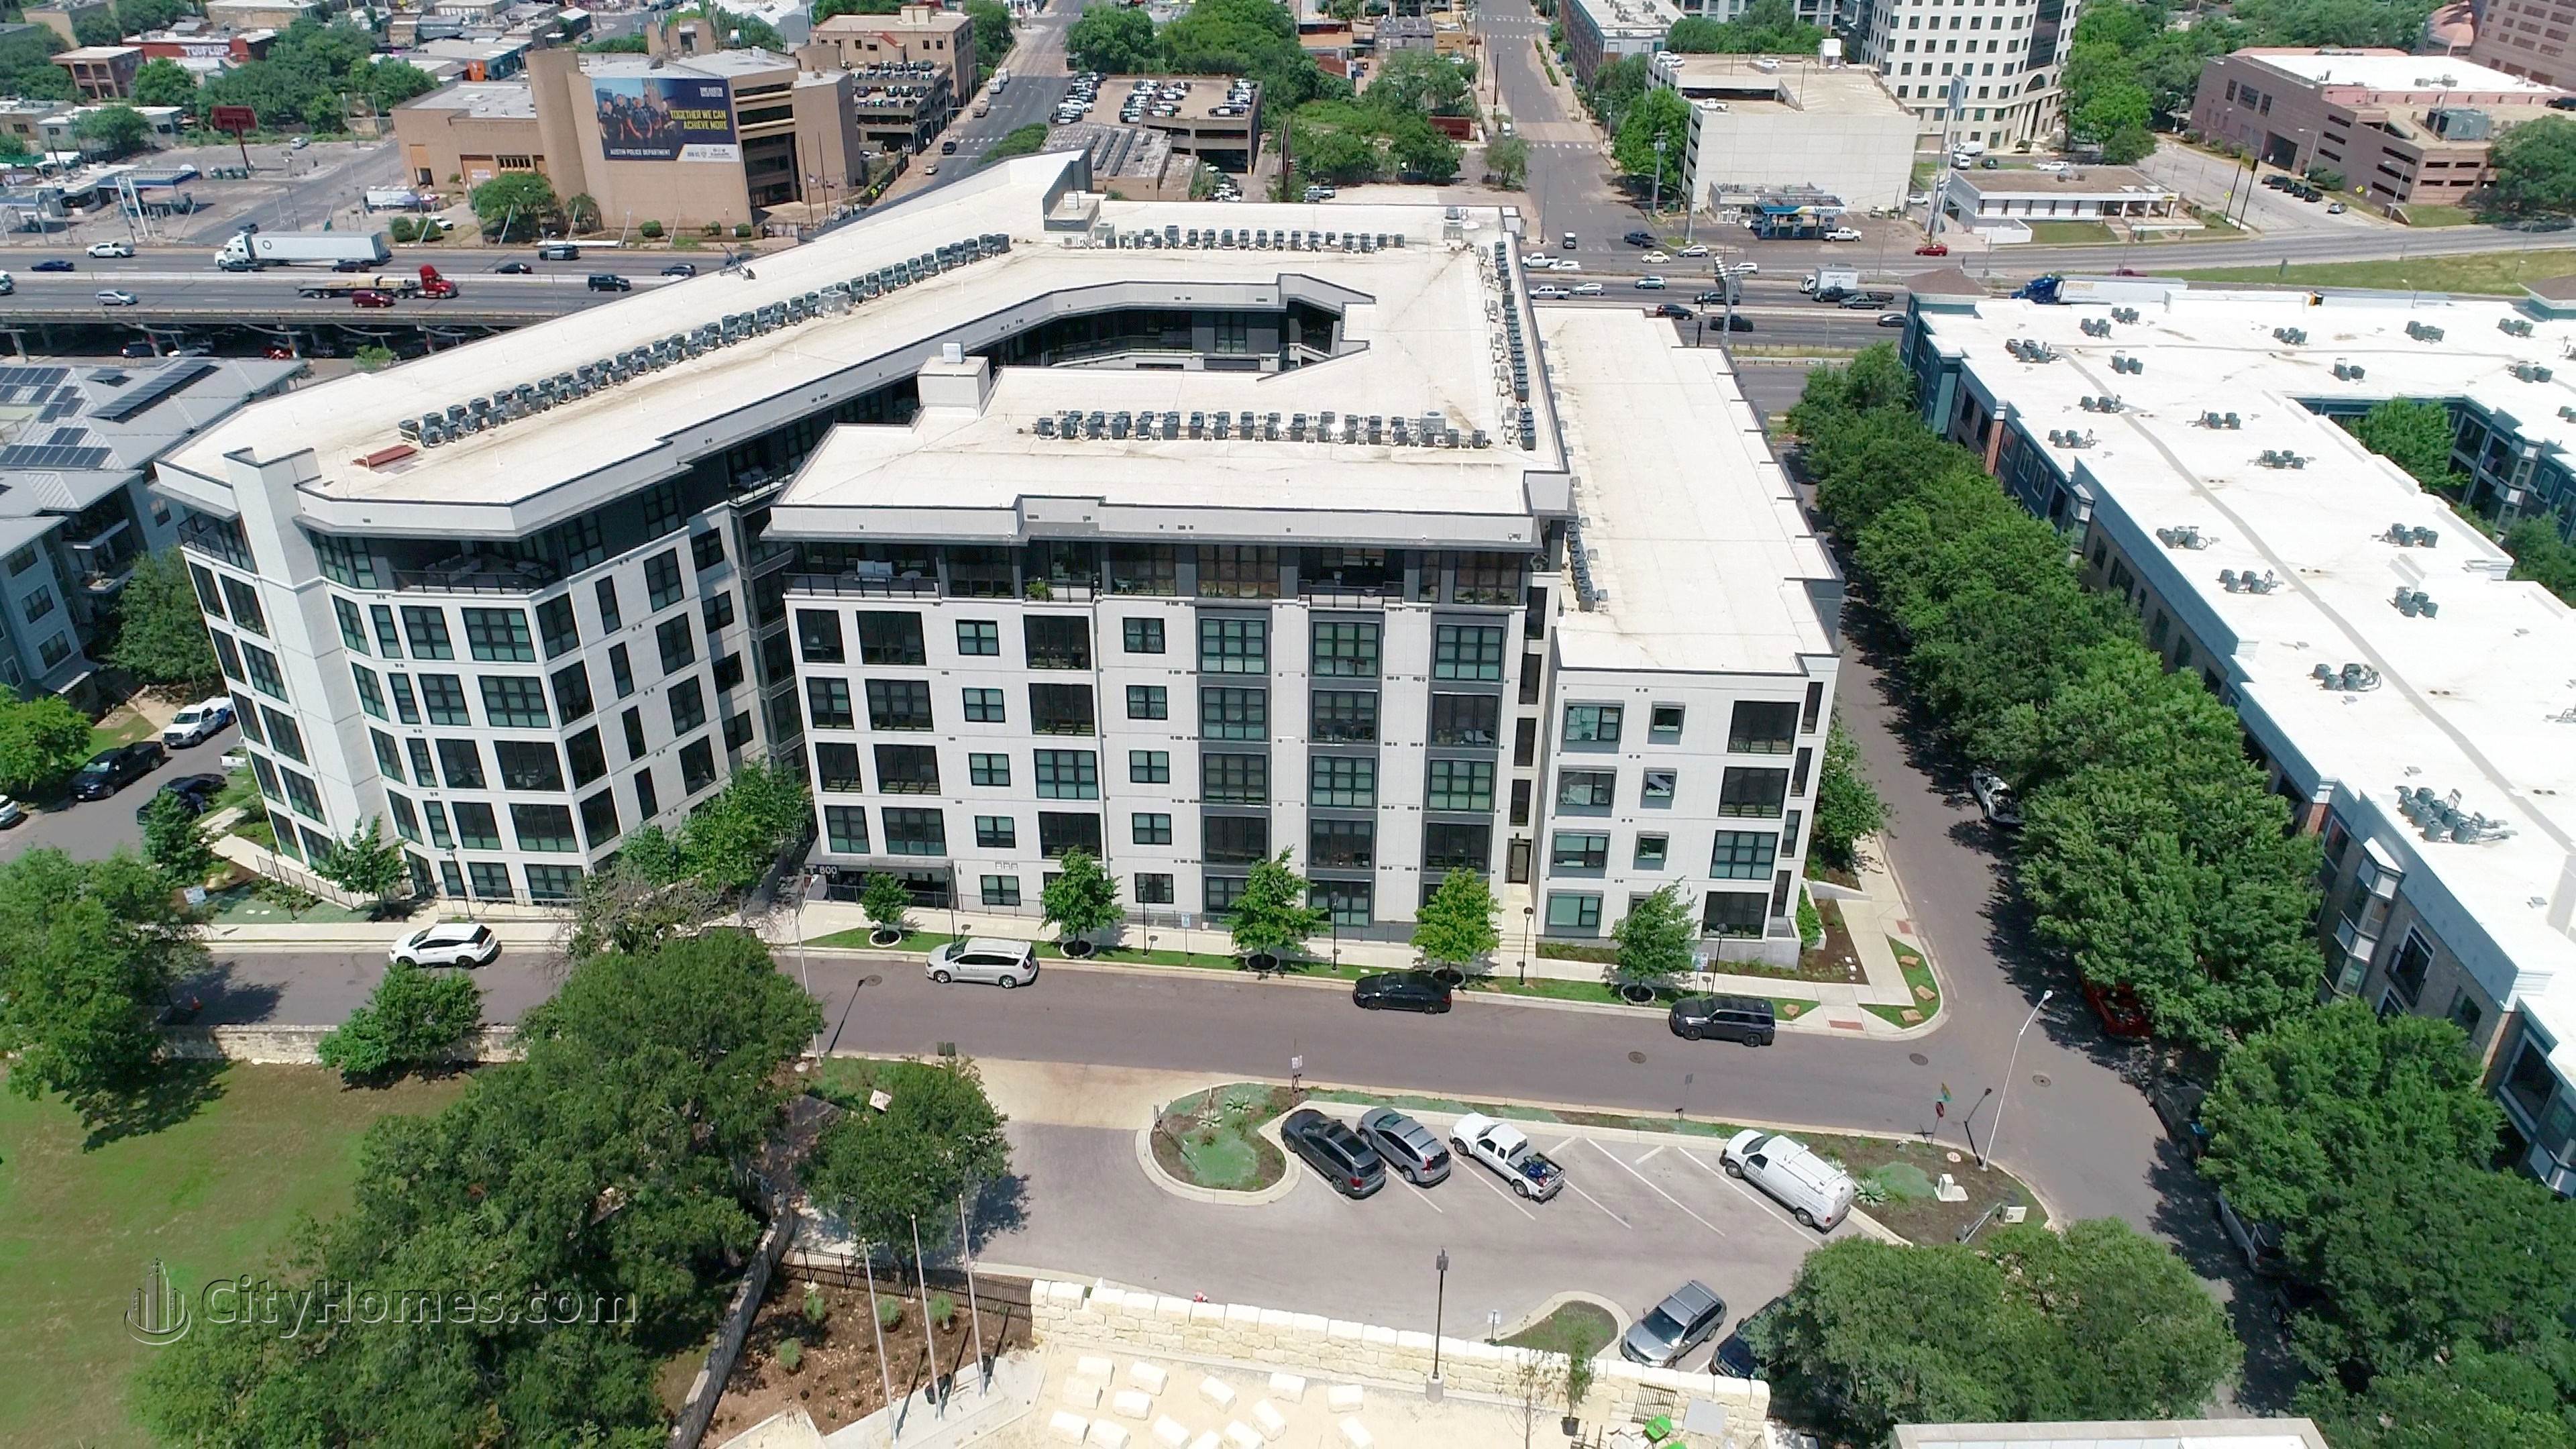 3. The Tyndall building at 800 Embassy Dr, Central East Austin, Austin, TX 78702